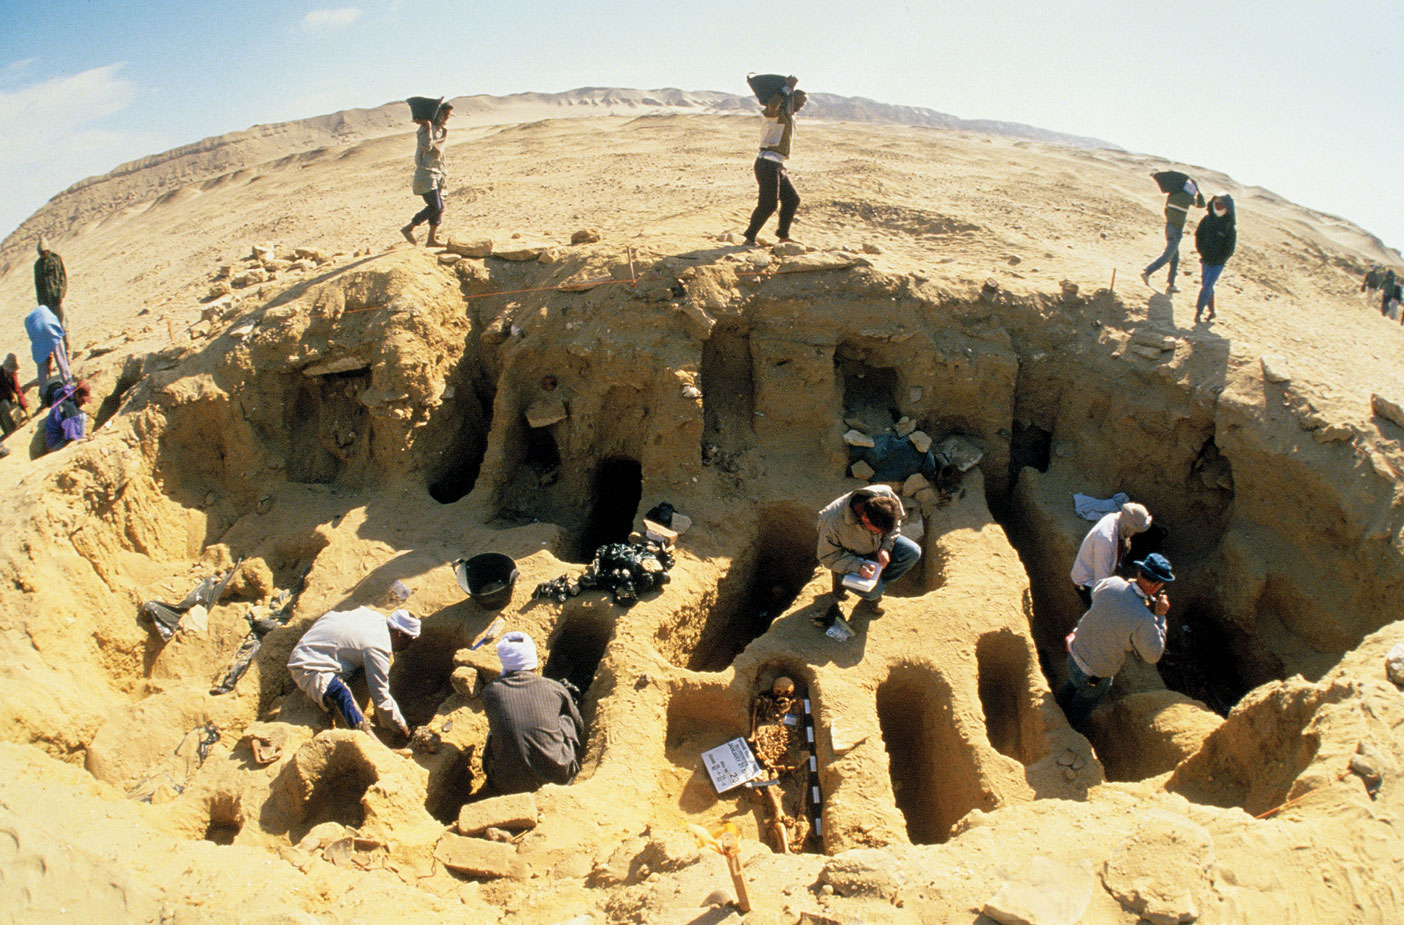 The BYU excavation site at Fag el Gamous cemetery in Egypt.